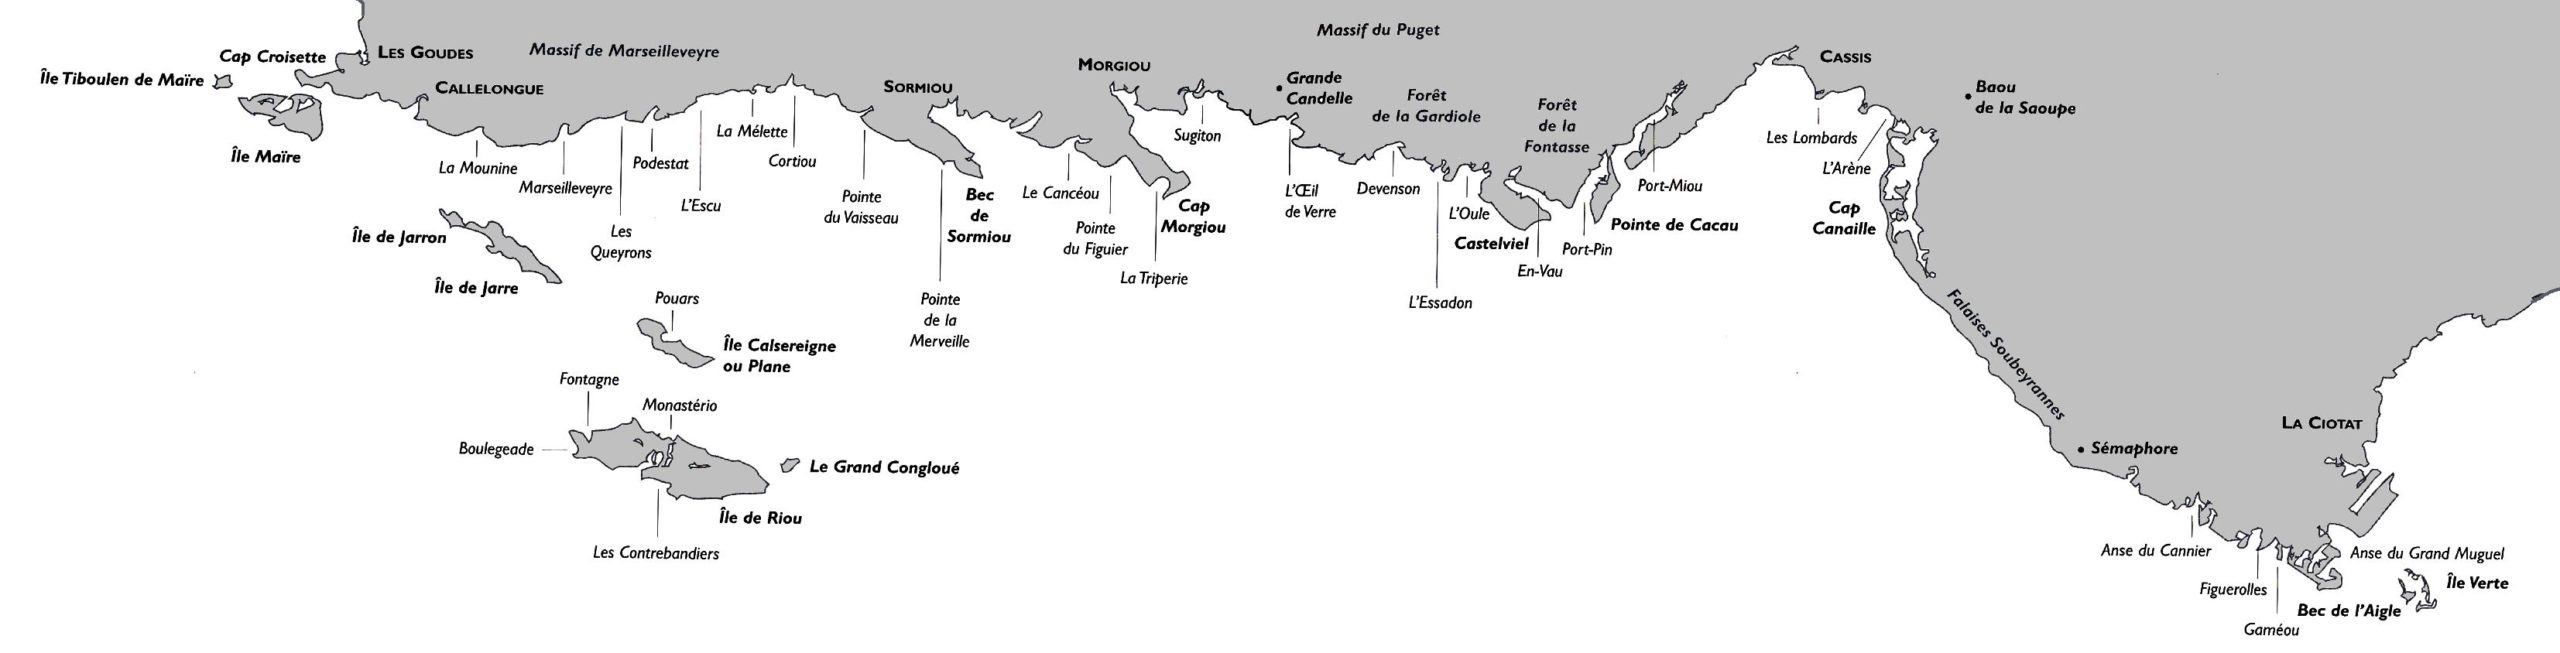 Carte des Calanques © Christophe.moustier - licence [CC BY-SA 3.0] from Wikimedia Commons